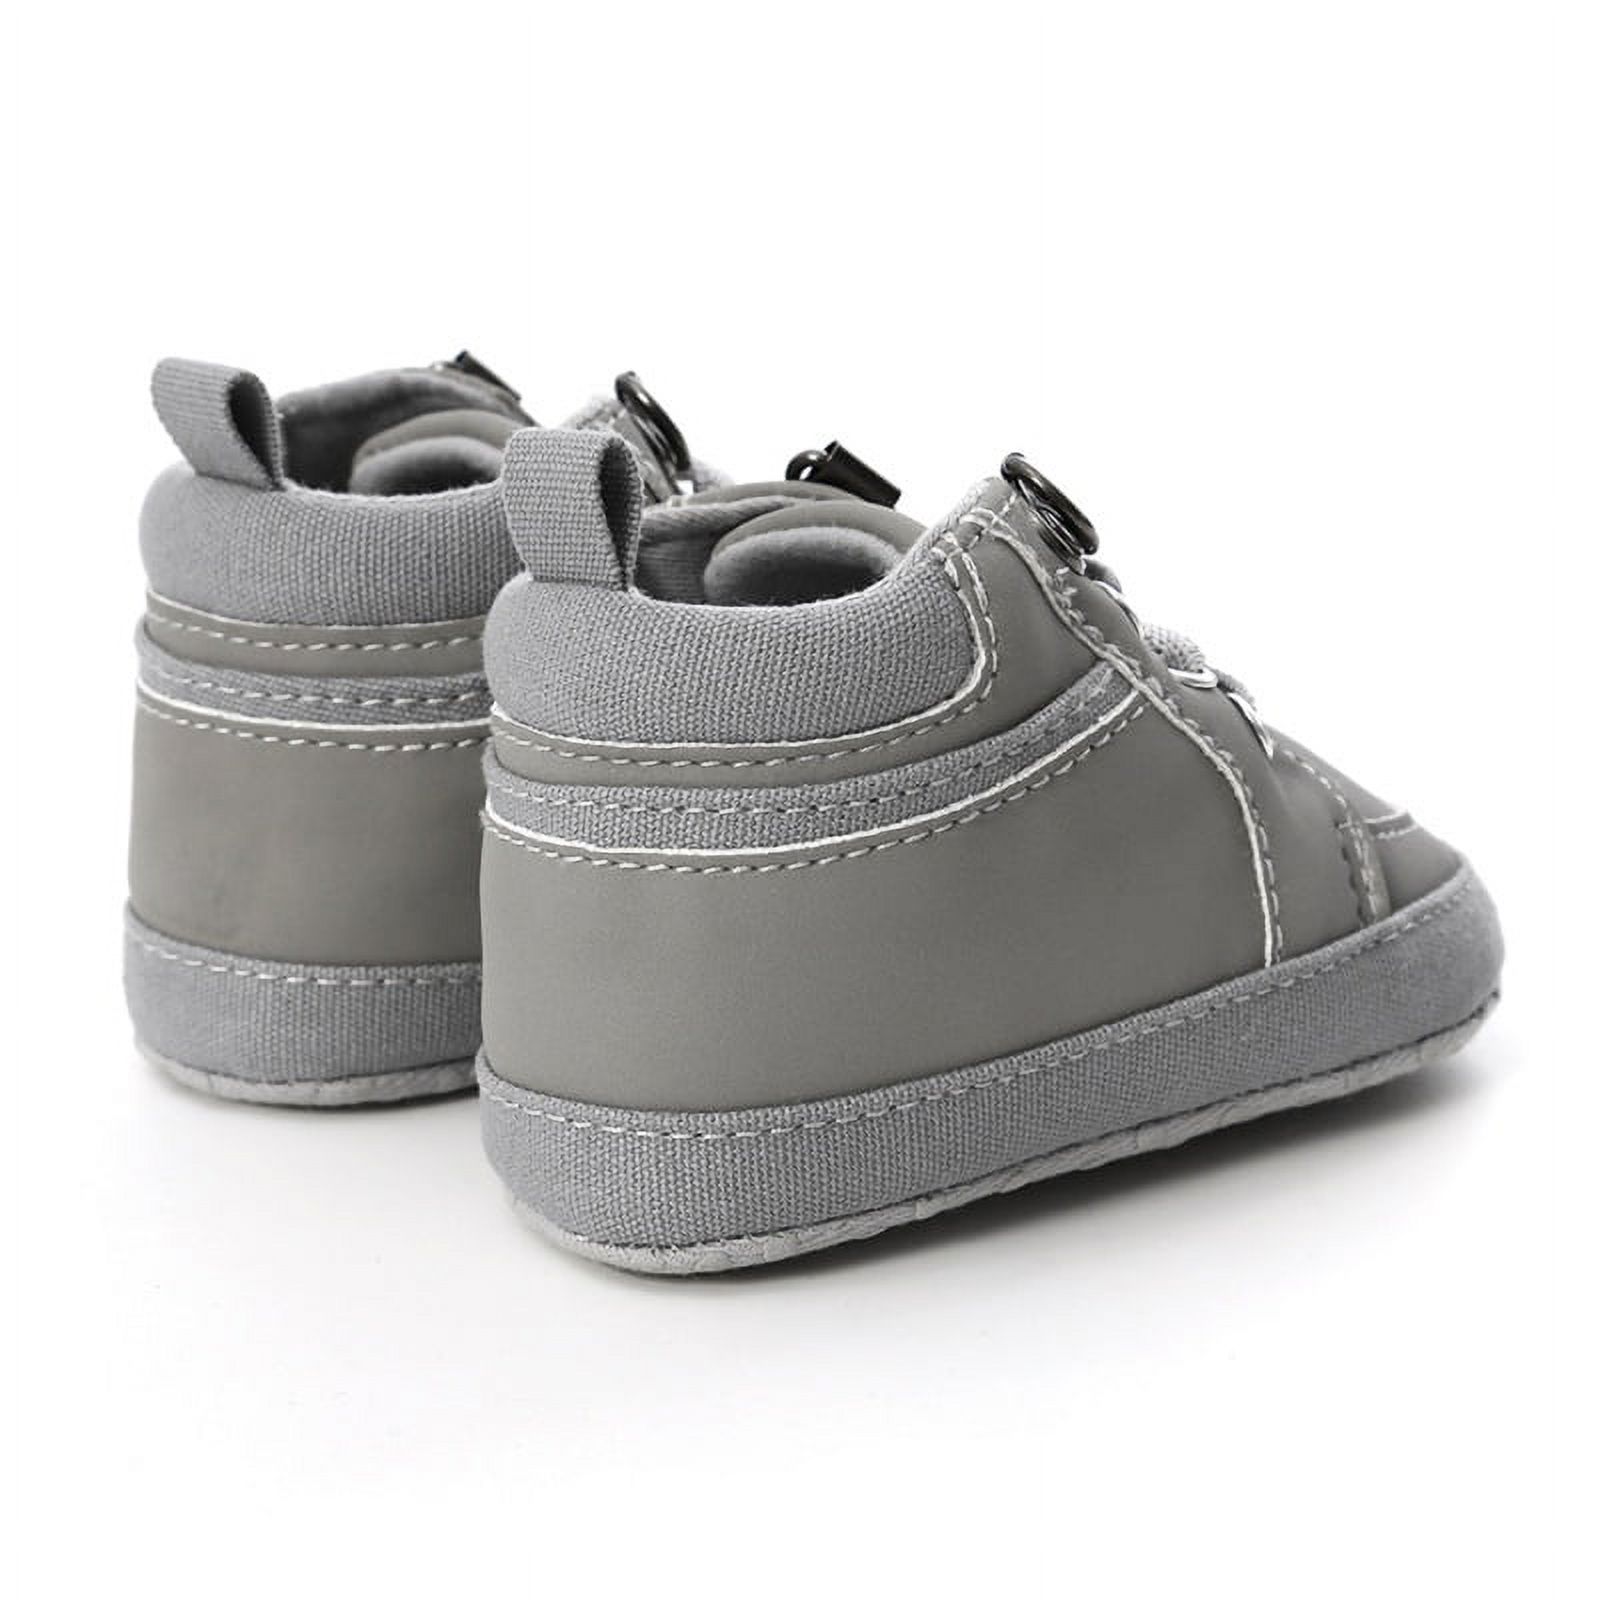 Baby Girls Boys Walking Shoes Toddler Infant First Walker Soft Sole High-Top Ankle Sneakers Newborn Crib Shoe - image 4 of 7